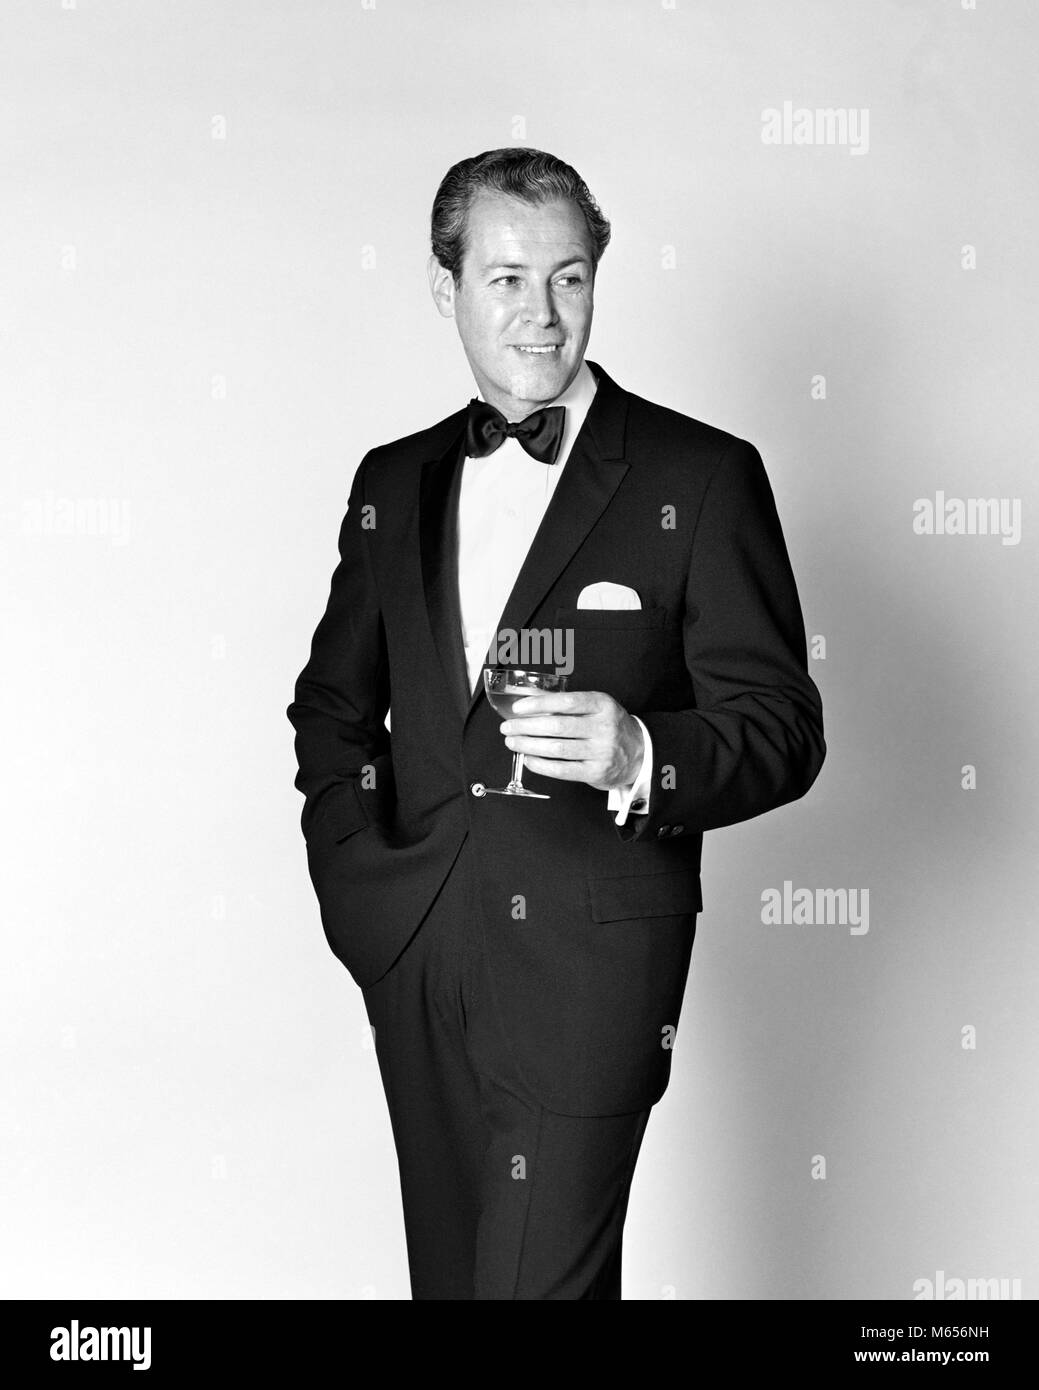 1960s SMILING MAN WEARING TUXEDO HOLDING CHAMPAGNE GLASS - f12257 HAR001 HARS ONE PERSON ONLY LUXURY COPY SPACE HALF-LENGTH INDOORS CONFIDENCE NOSTALGIA 30-35 YEARS 35-40 YEARS SUCCESS TUX HAPPINESS CHEERFUL BEVERAGE LEISURE STYLES RELAXATION SOPHISTICATED RECREATION HANDSOME PRIDE SMILES JOYFUL FASHIONS ATTIRE CALM ATTRACTIVE CONFIDENT MALES MID-ADULT MID-ADULT MAN B&W BLACK AND WHITE BLACK TIE CAUCASIAN ETHNICITY COLLECTED DEBONAIR OLD FASHIONED PERSONS URBANE Stock Photo